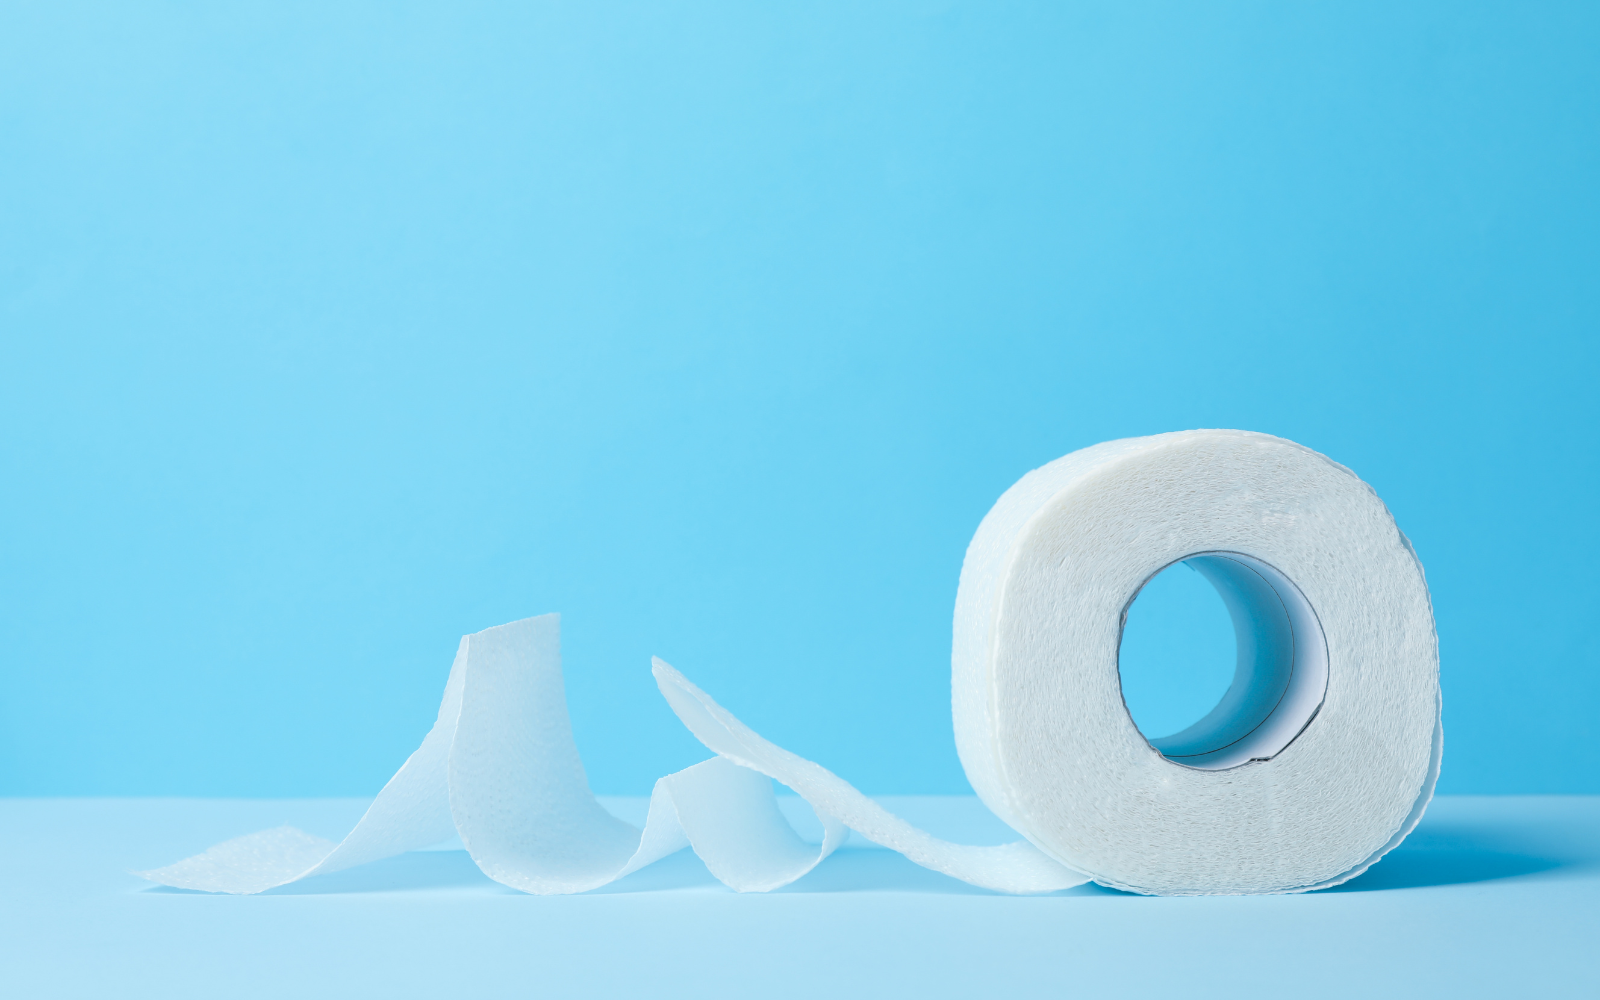 Unraveling the facts about Toilet Paper